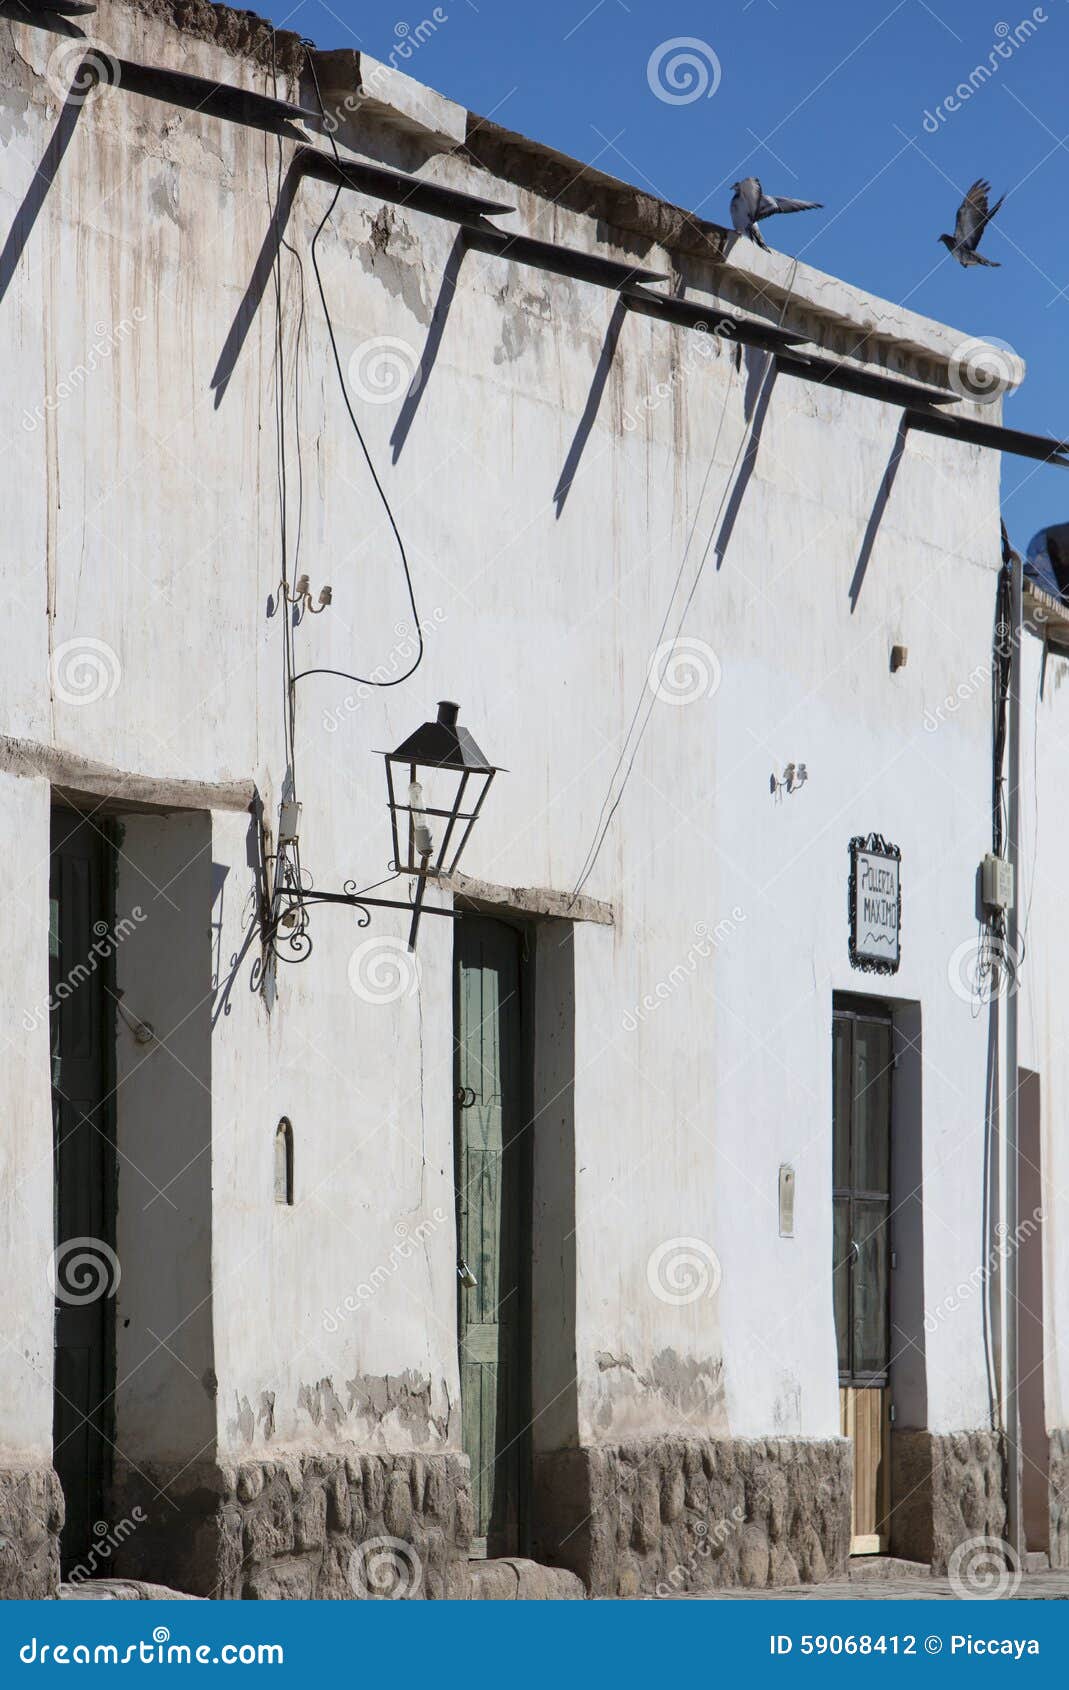 colonial architecture in cachi, blue sky and birds. argentina